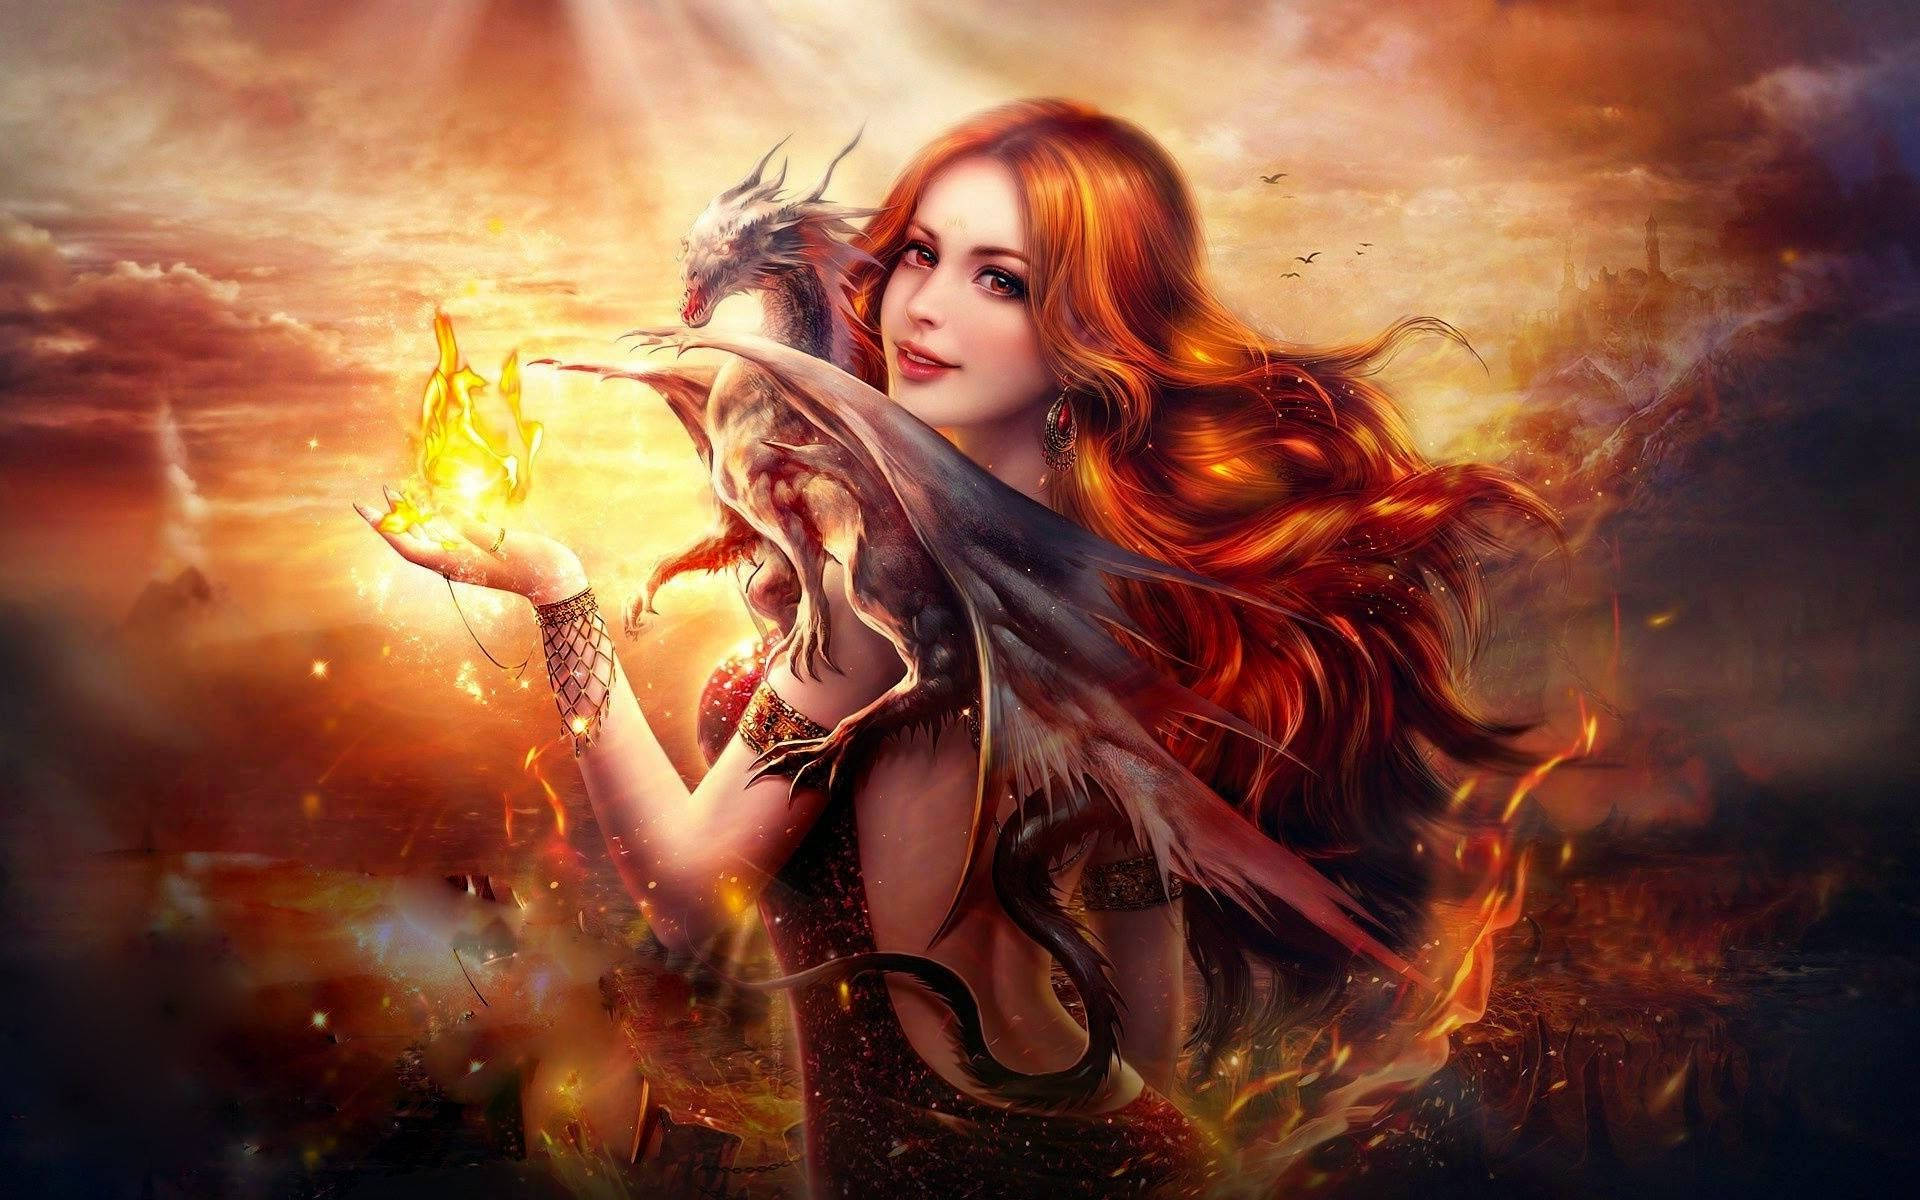 Daring Adventure - A Fantasy Girl Tries Her Hand At Fire-breathing